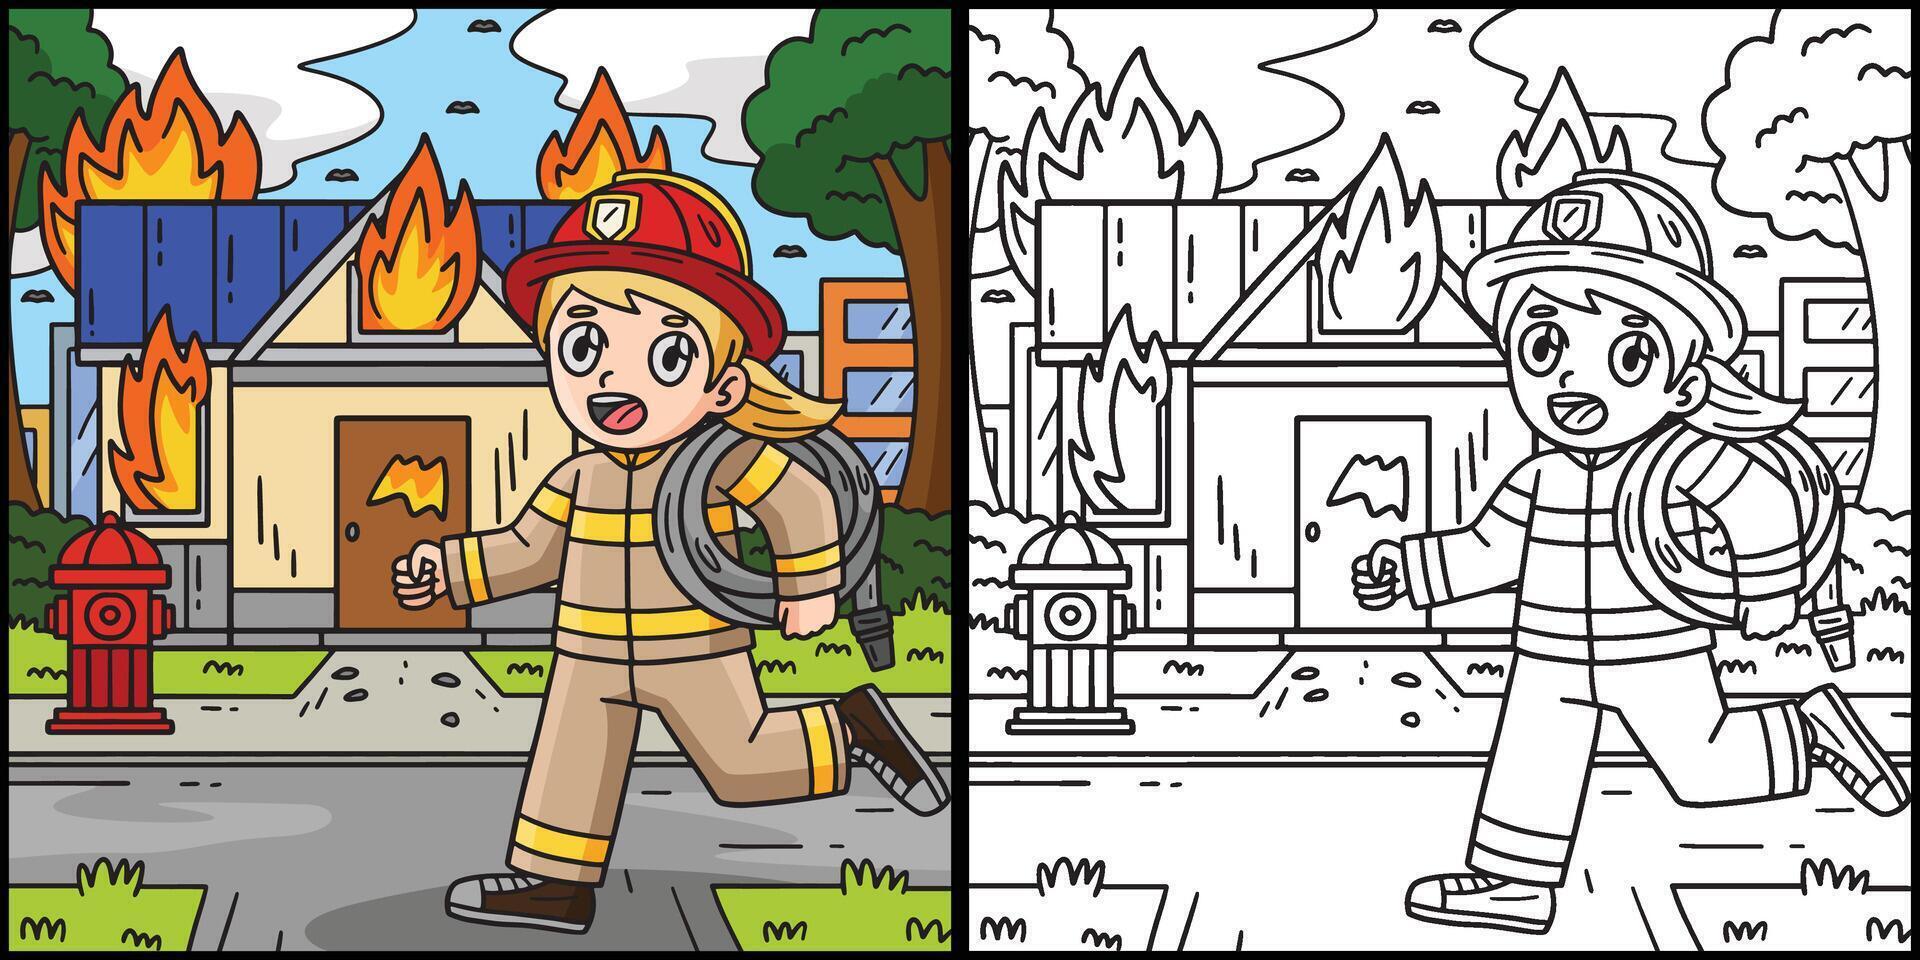 Firefighter and Building on Fire Illustration vector